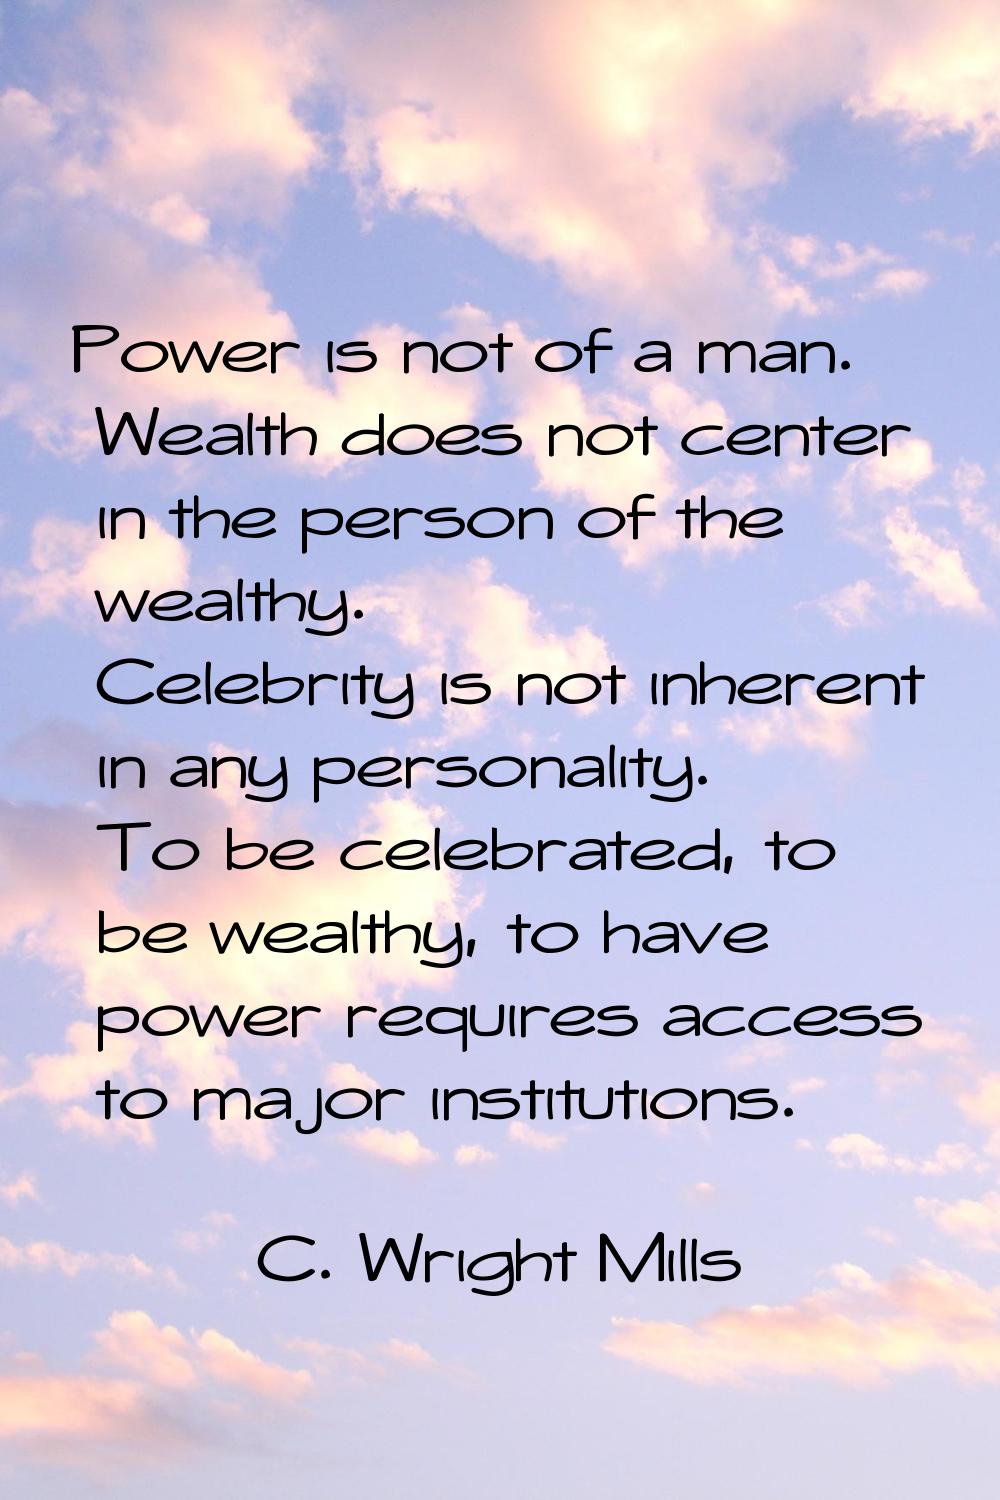 Power is not of a man. Wealth does not center in the person of the wealthy. Celebrity is not inhere